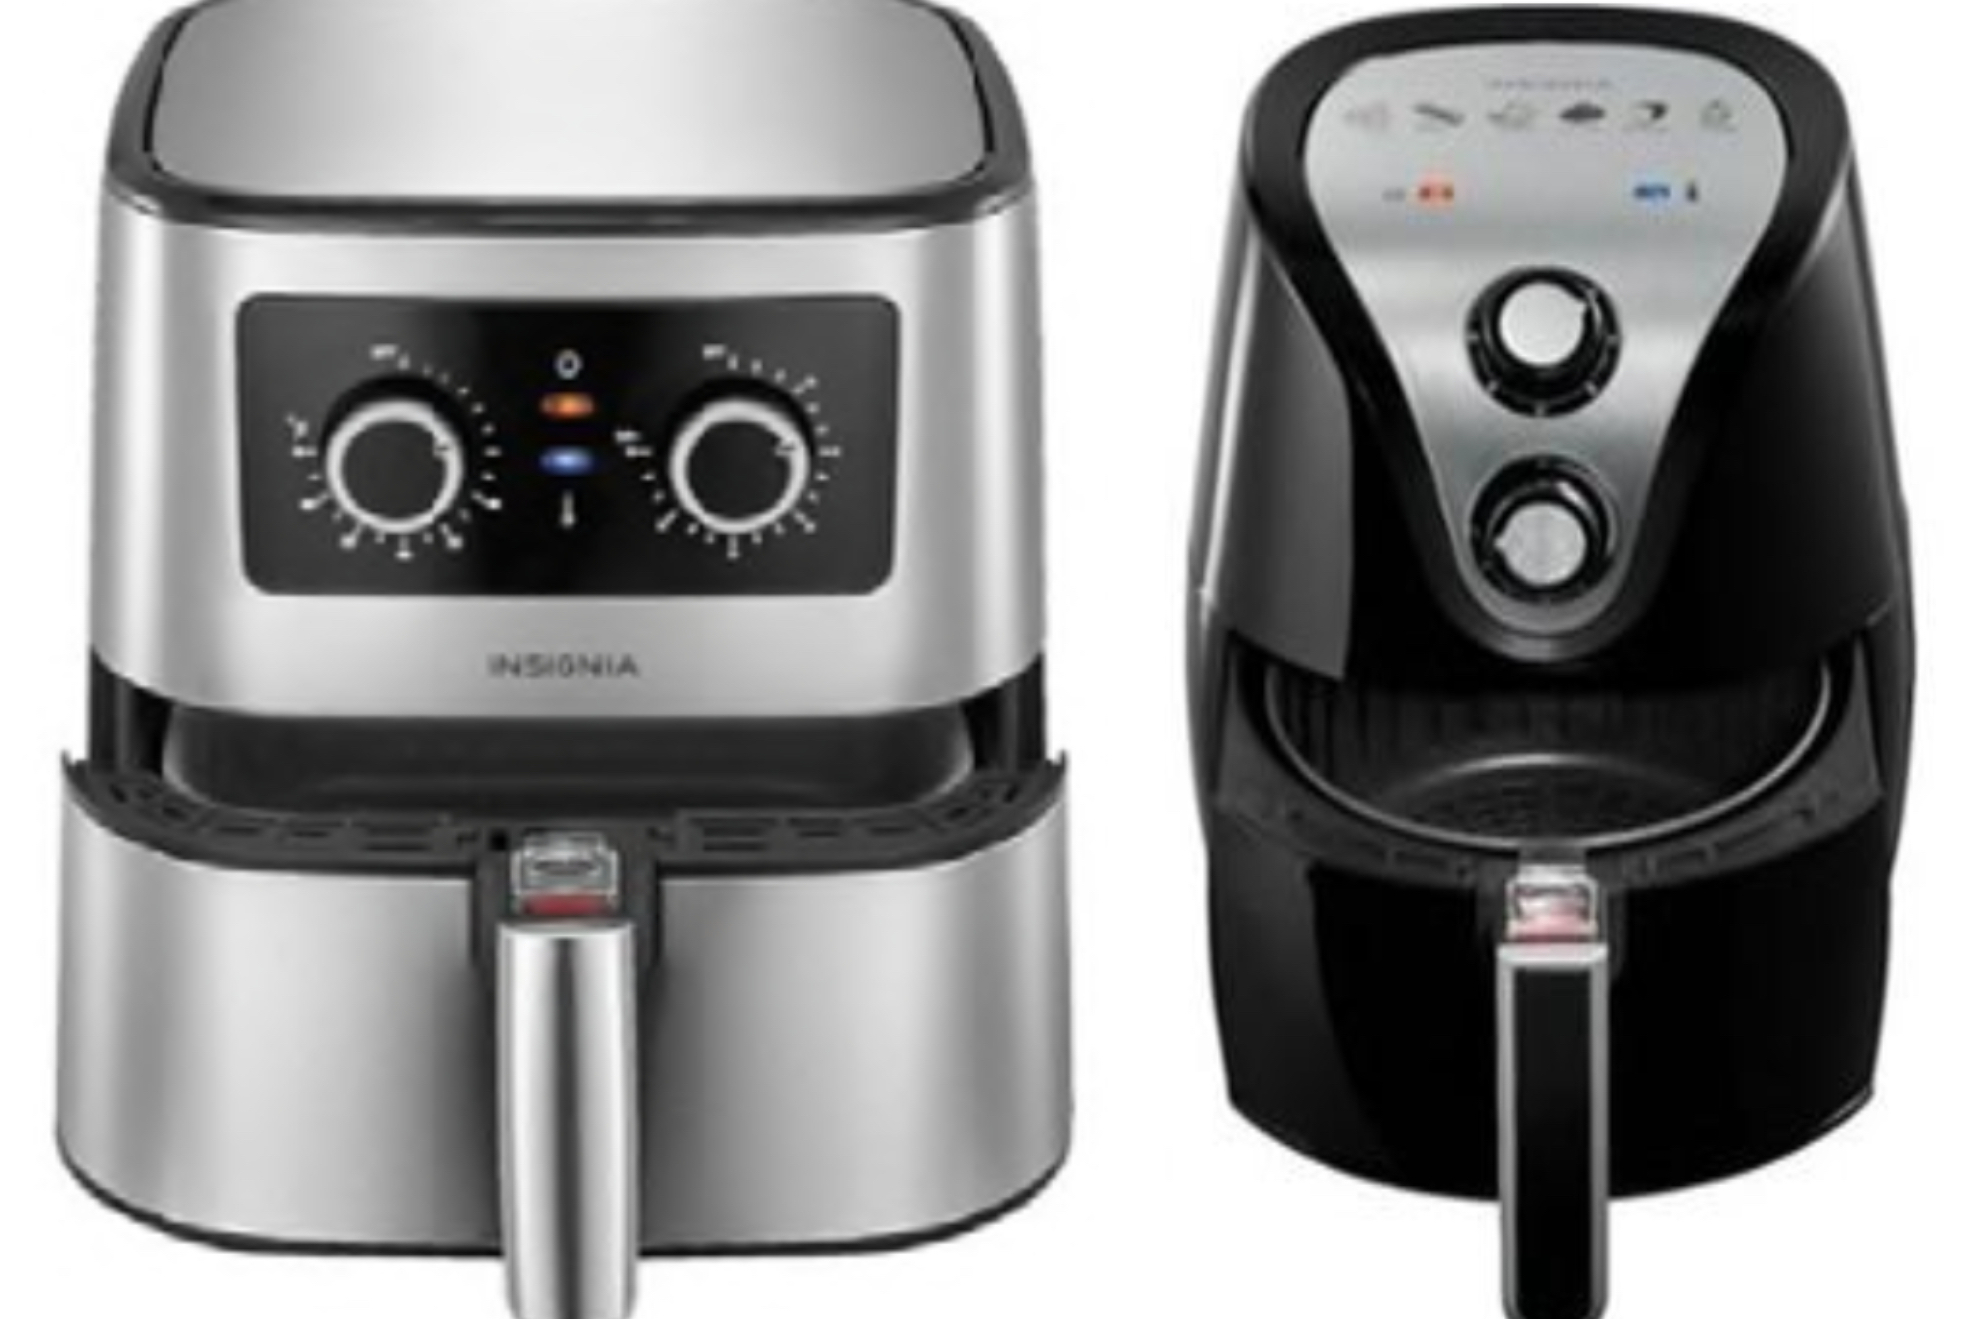 BEST BUY RECALLS INSIGNIA AIR FRYERS AND AIR FRYER OVENS DUE TO FIRE AND  BURN HAZARDS - Ocean County Scanner News